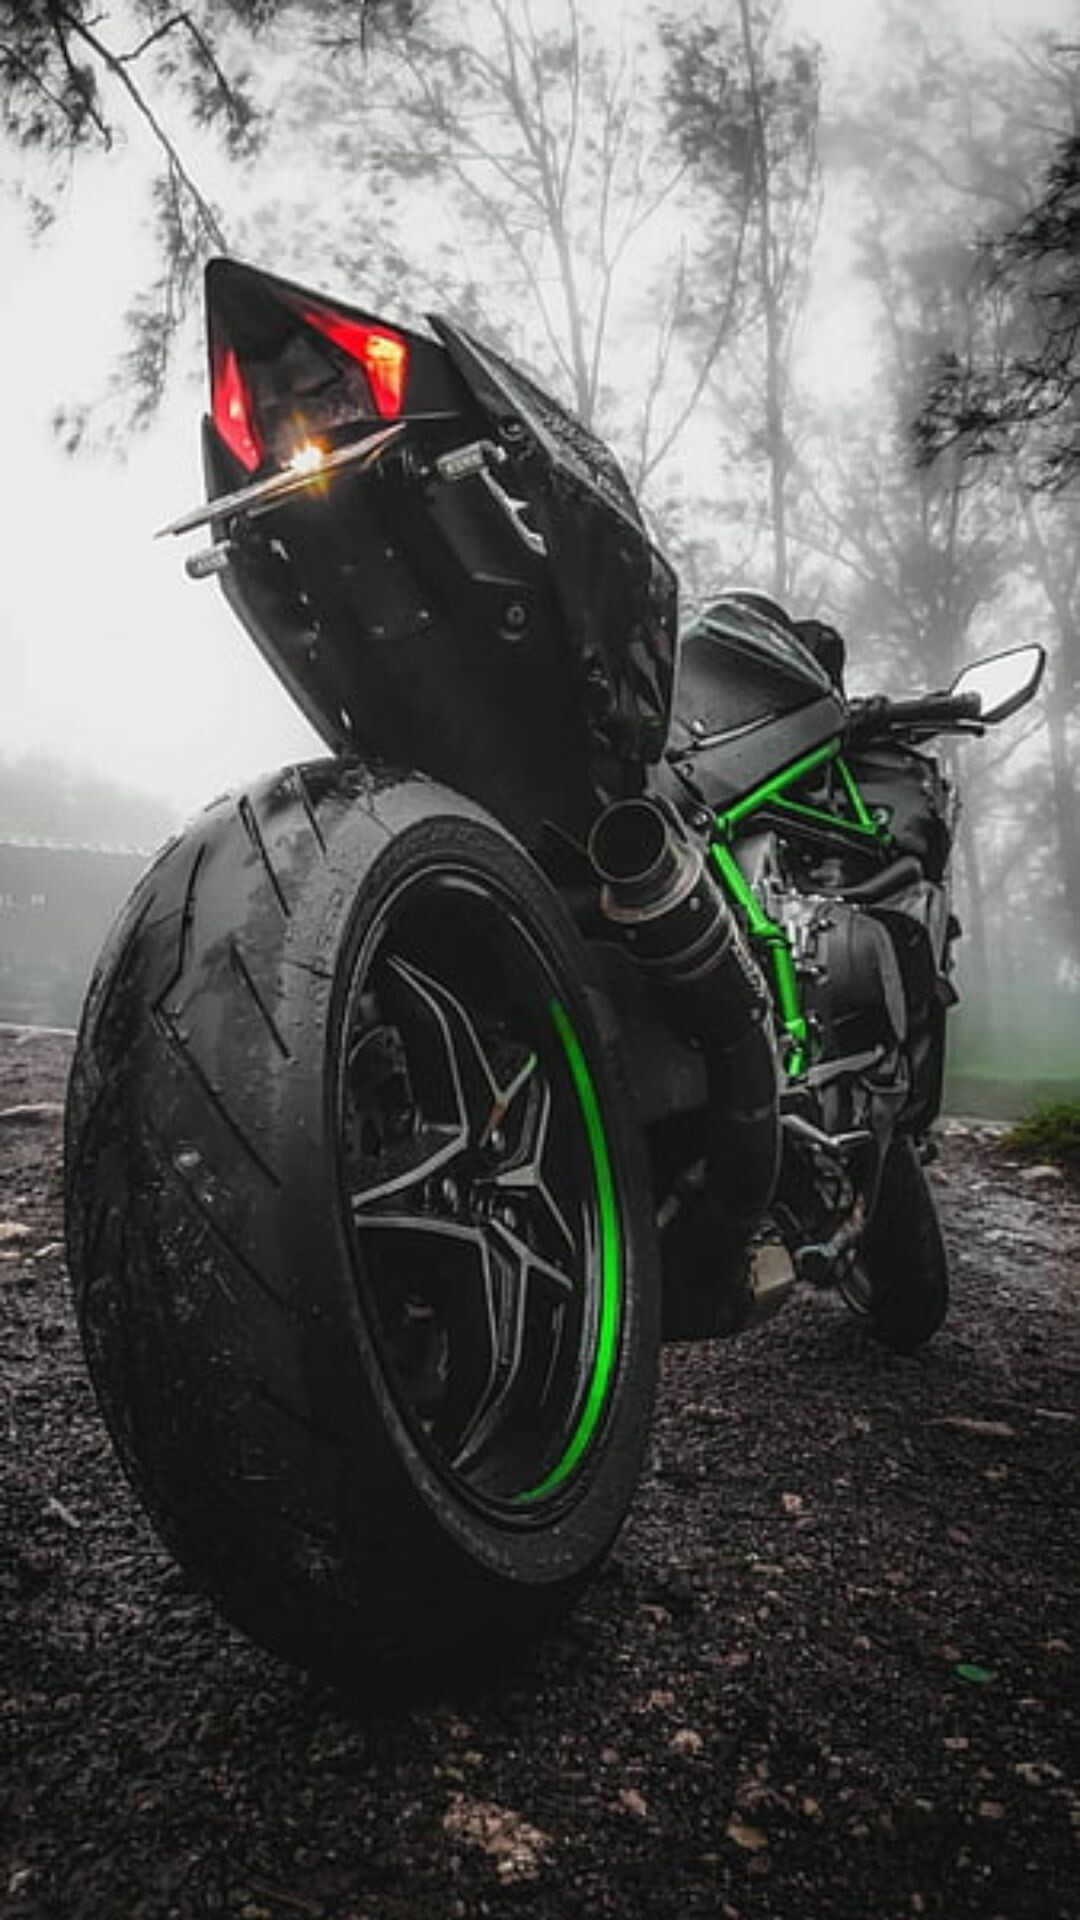 Kawasaki: The marque has notched up a total of 34 victories at the Isle of Man TT Races. 1080x1920 Full HD Background.